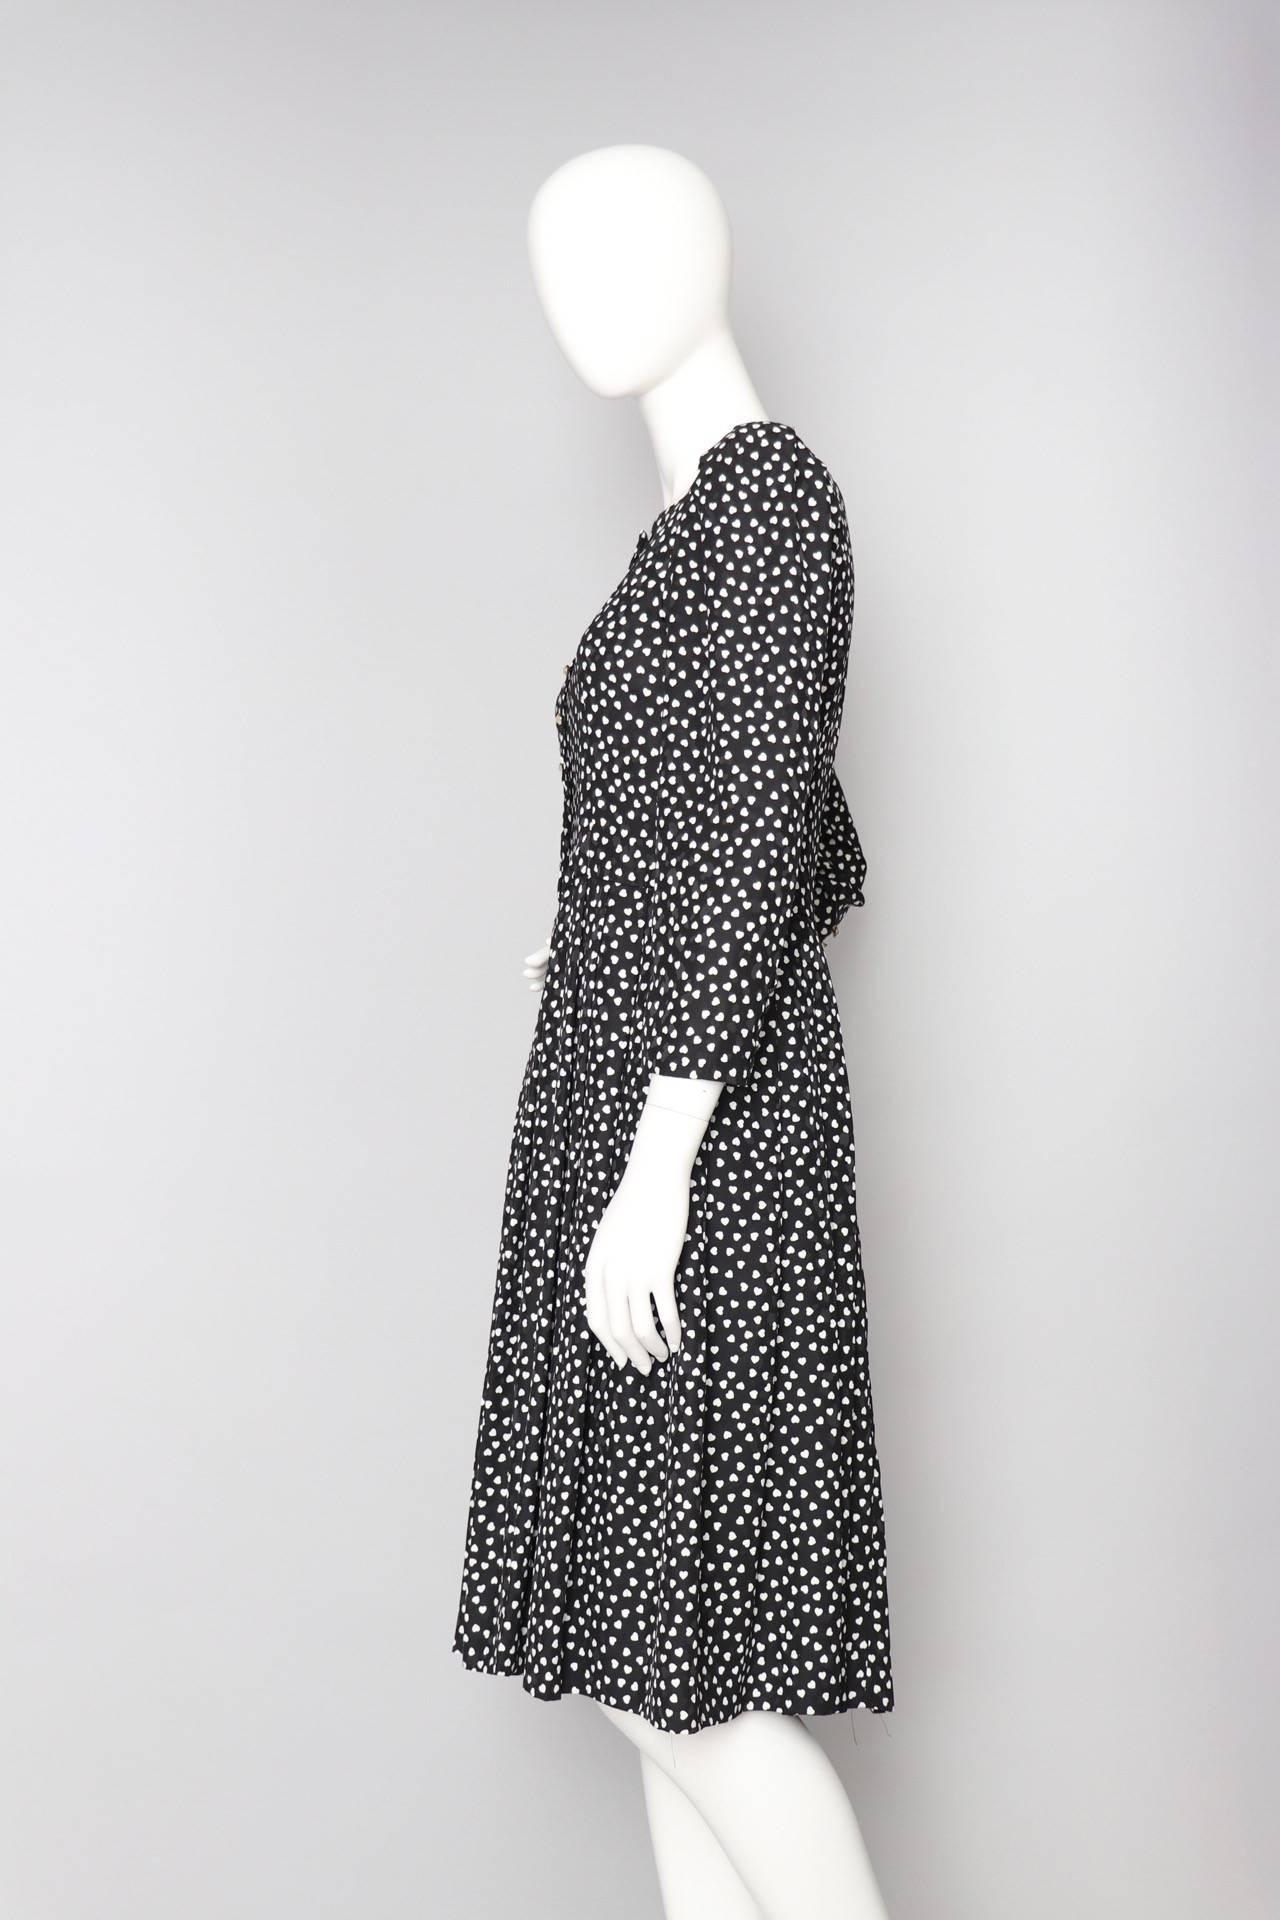 A great 1980s Hanae Mori black dress with a round skirt, long sleeves with pearl embellished cuffs, and a fitted waist. The dress has a round neckline and a back zipper and hook & eye closure. Small white hearts complete the jacquard woven fabric.